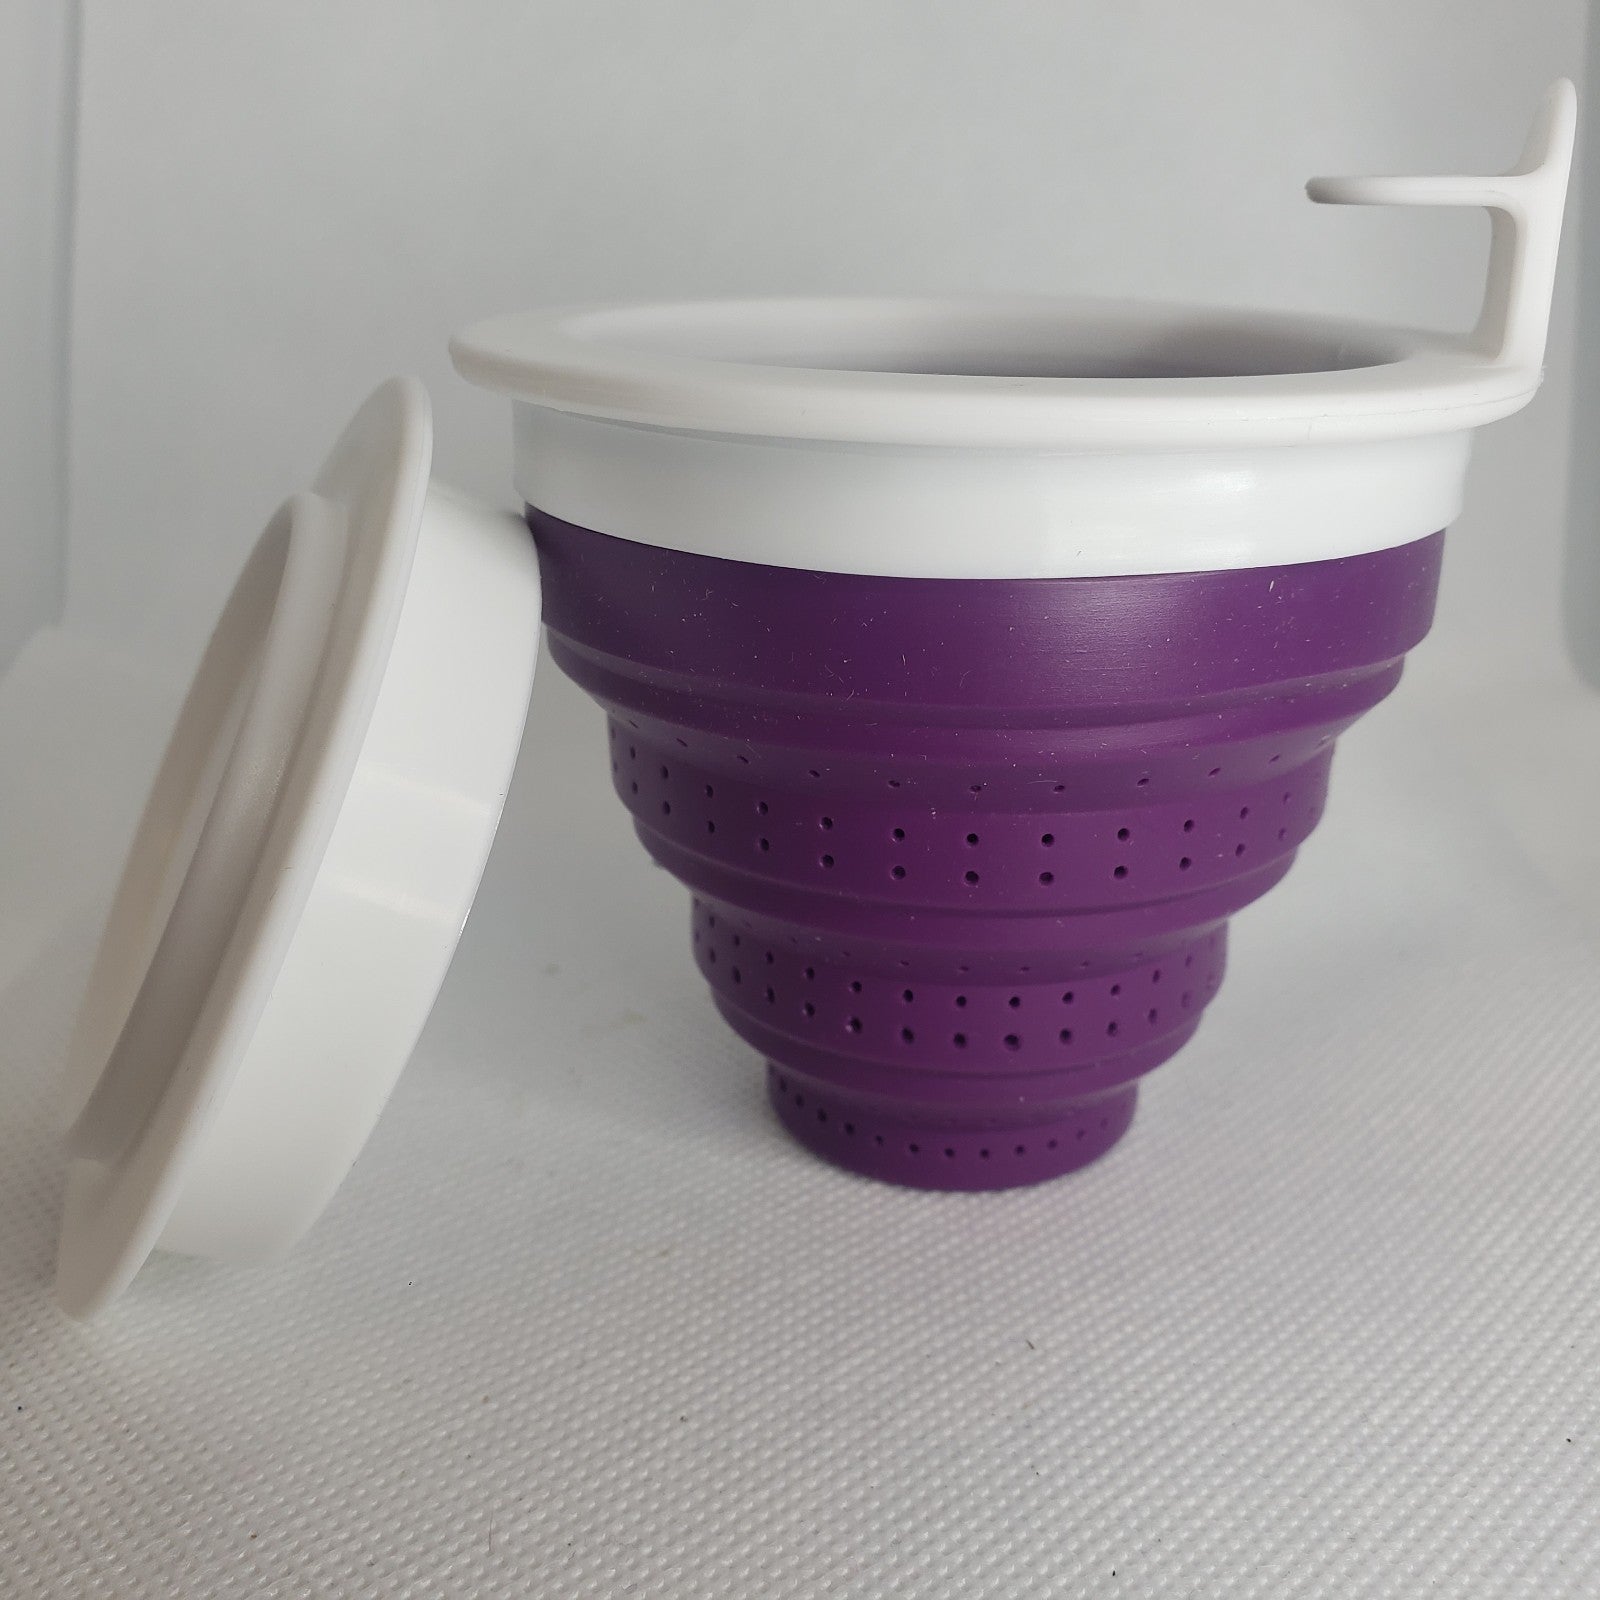 Image of a violet colored silicone tea steeper on a white background